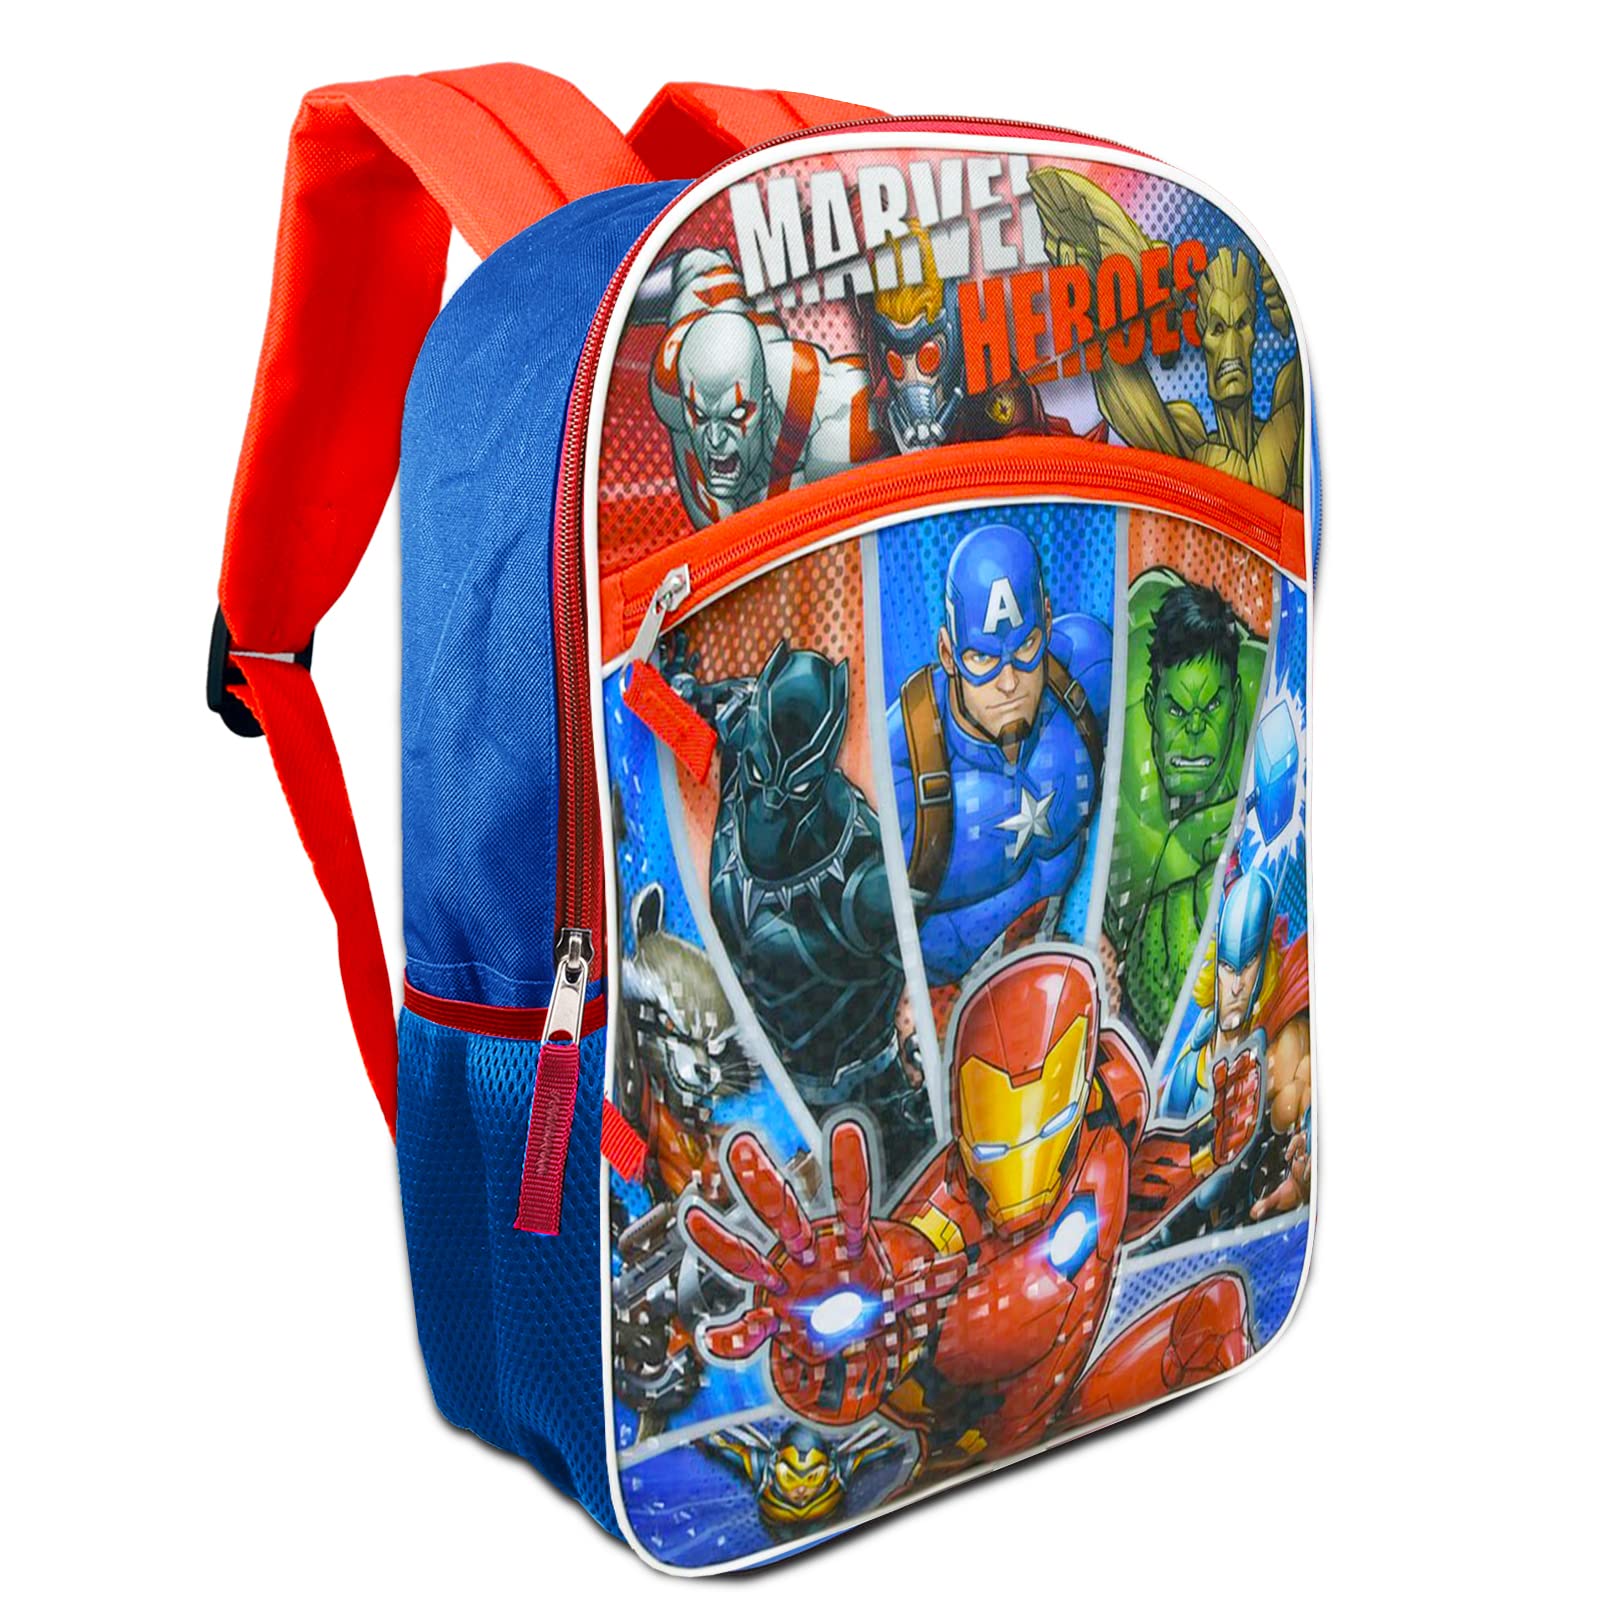 Avengers Backpack for Boys 8-12 Set - 16" Marvel Avengers Backpack Bundle with Water Bottle, Stickers, Stampers, More | Avengers School Supplies